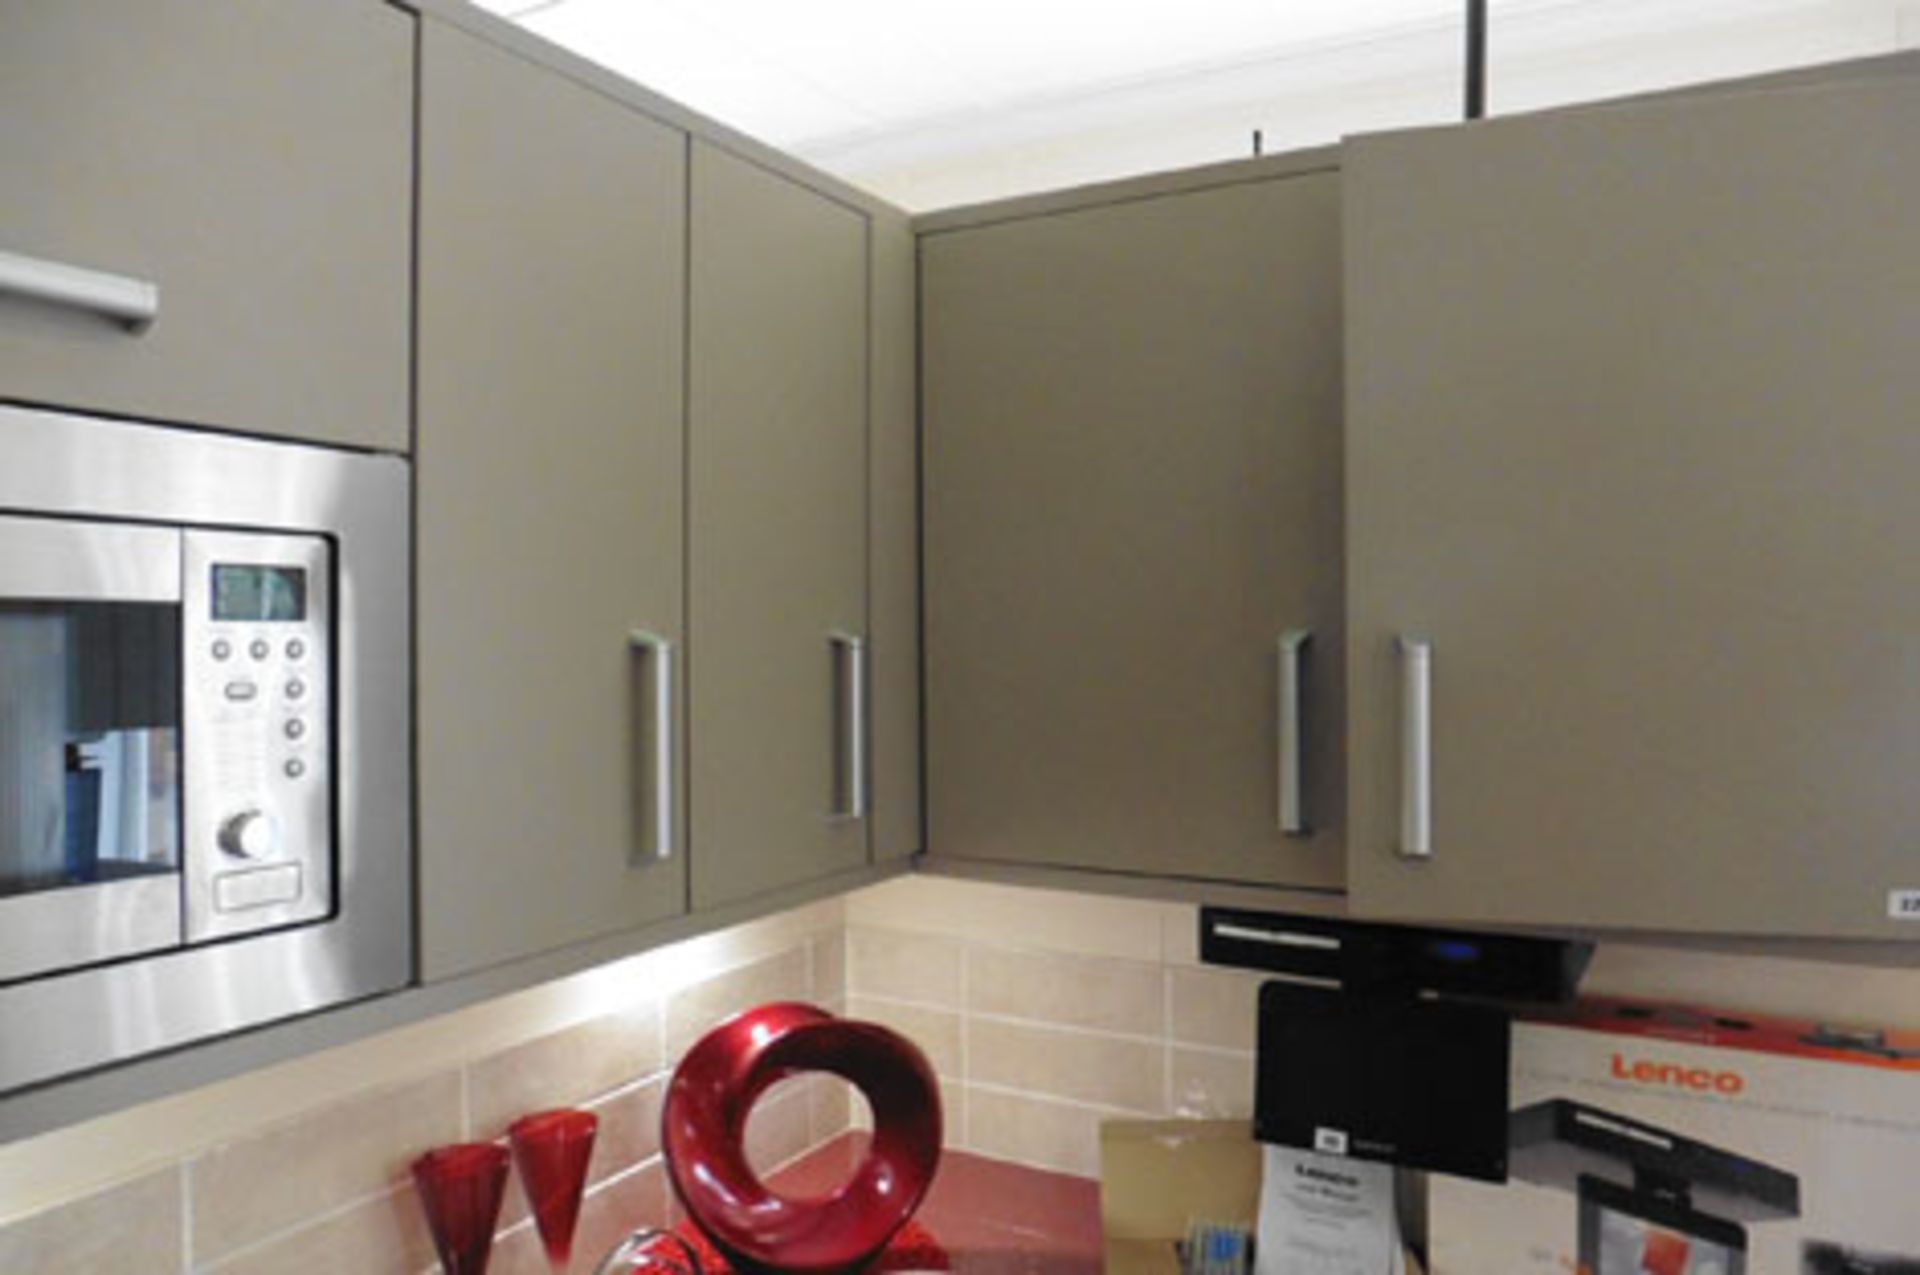 Limed wood beige U-shaped kitchen display with sparkly pink quartz effect work top, pull out - Image 4 of 6